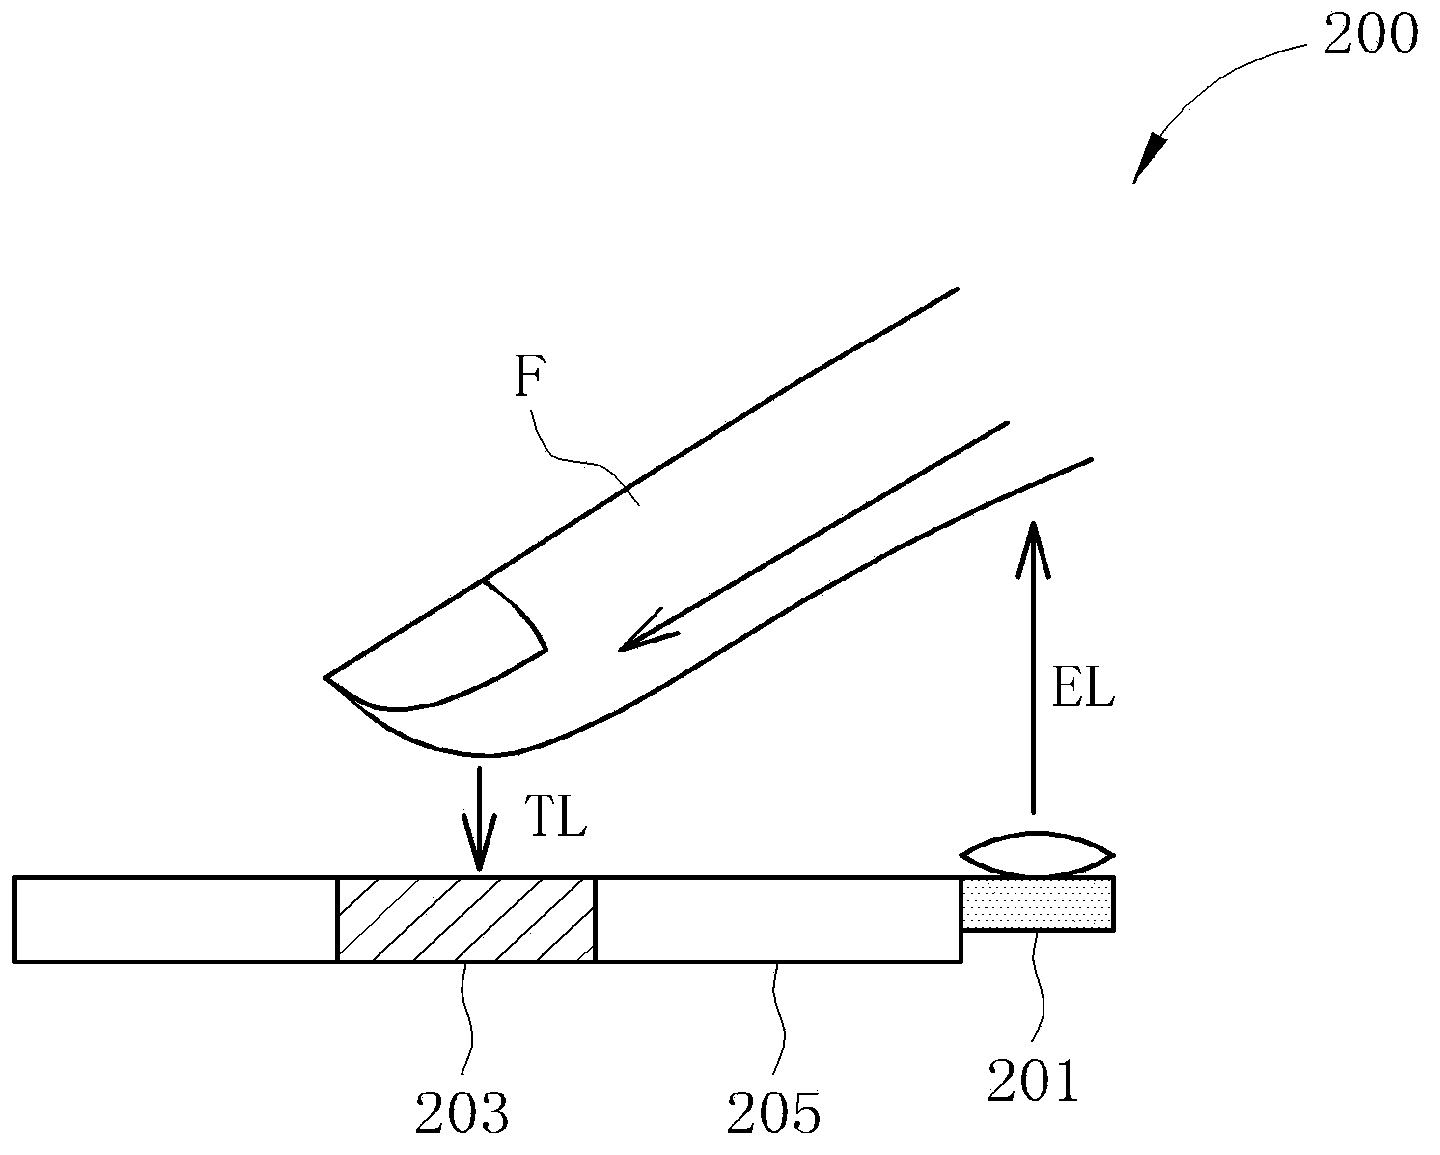 Image acquisition device and optical displacement estimation device